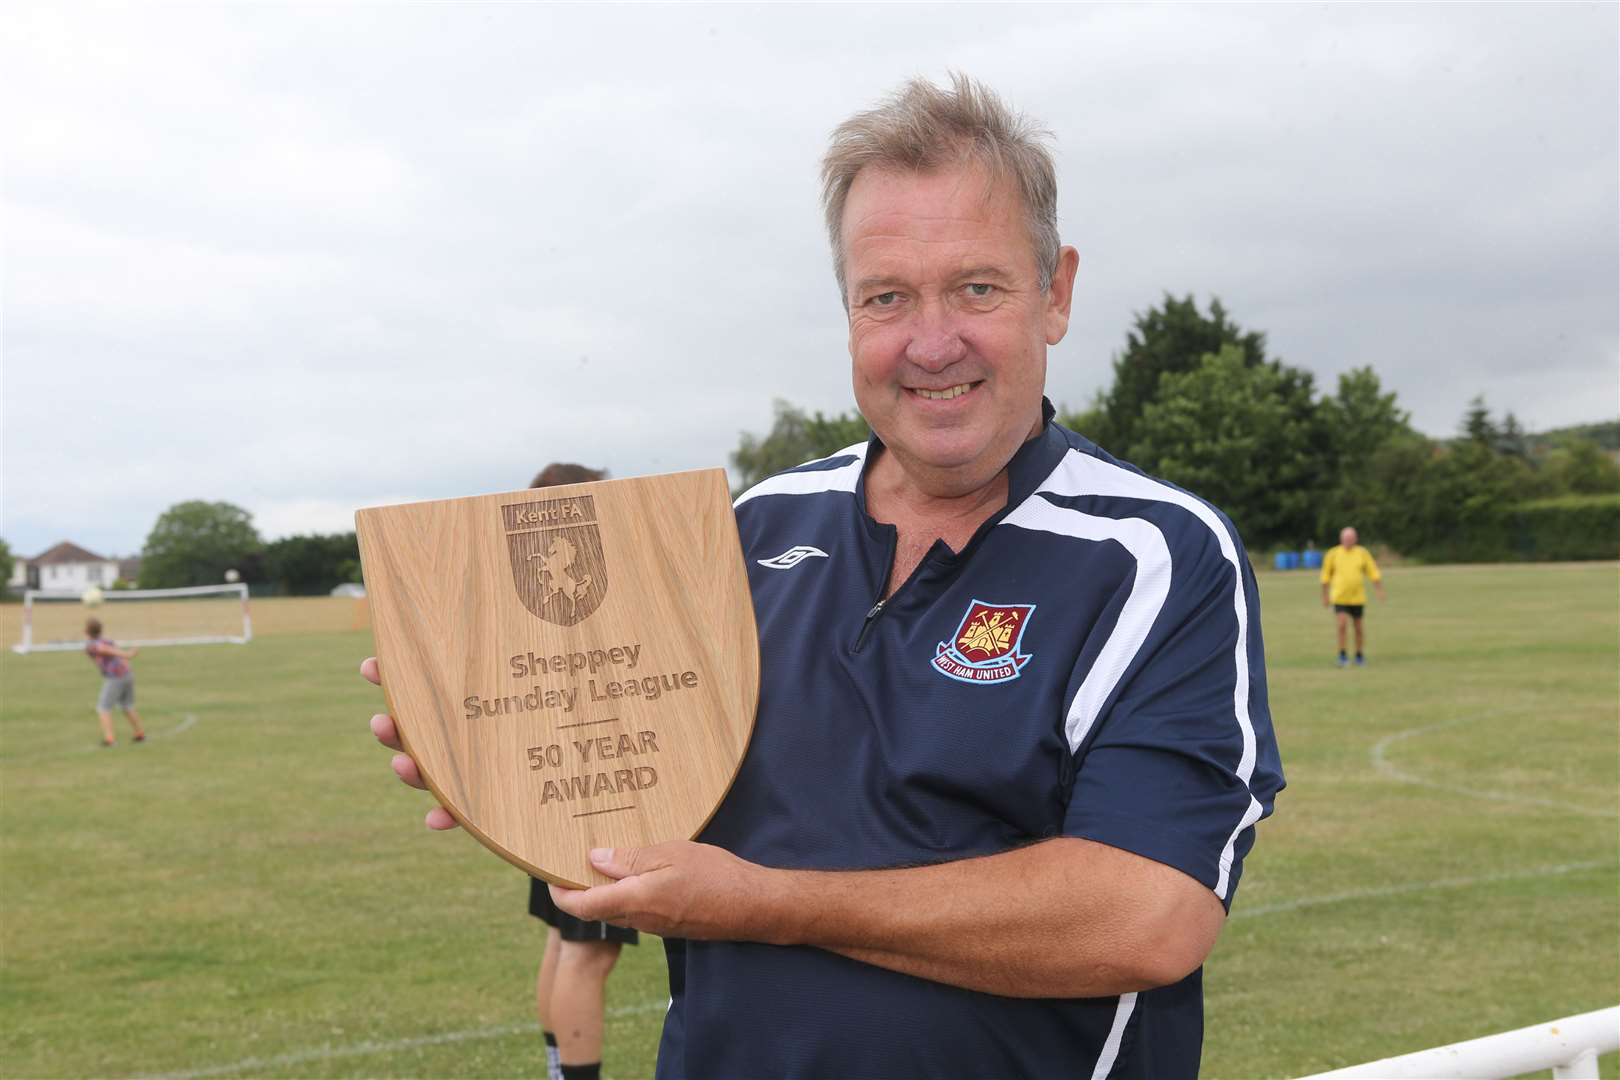 Mark Rogers of the Sheppey Sunday League with the league's 50-year award from the Kent FA in June, 2017